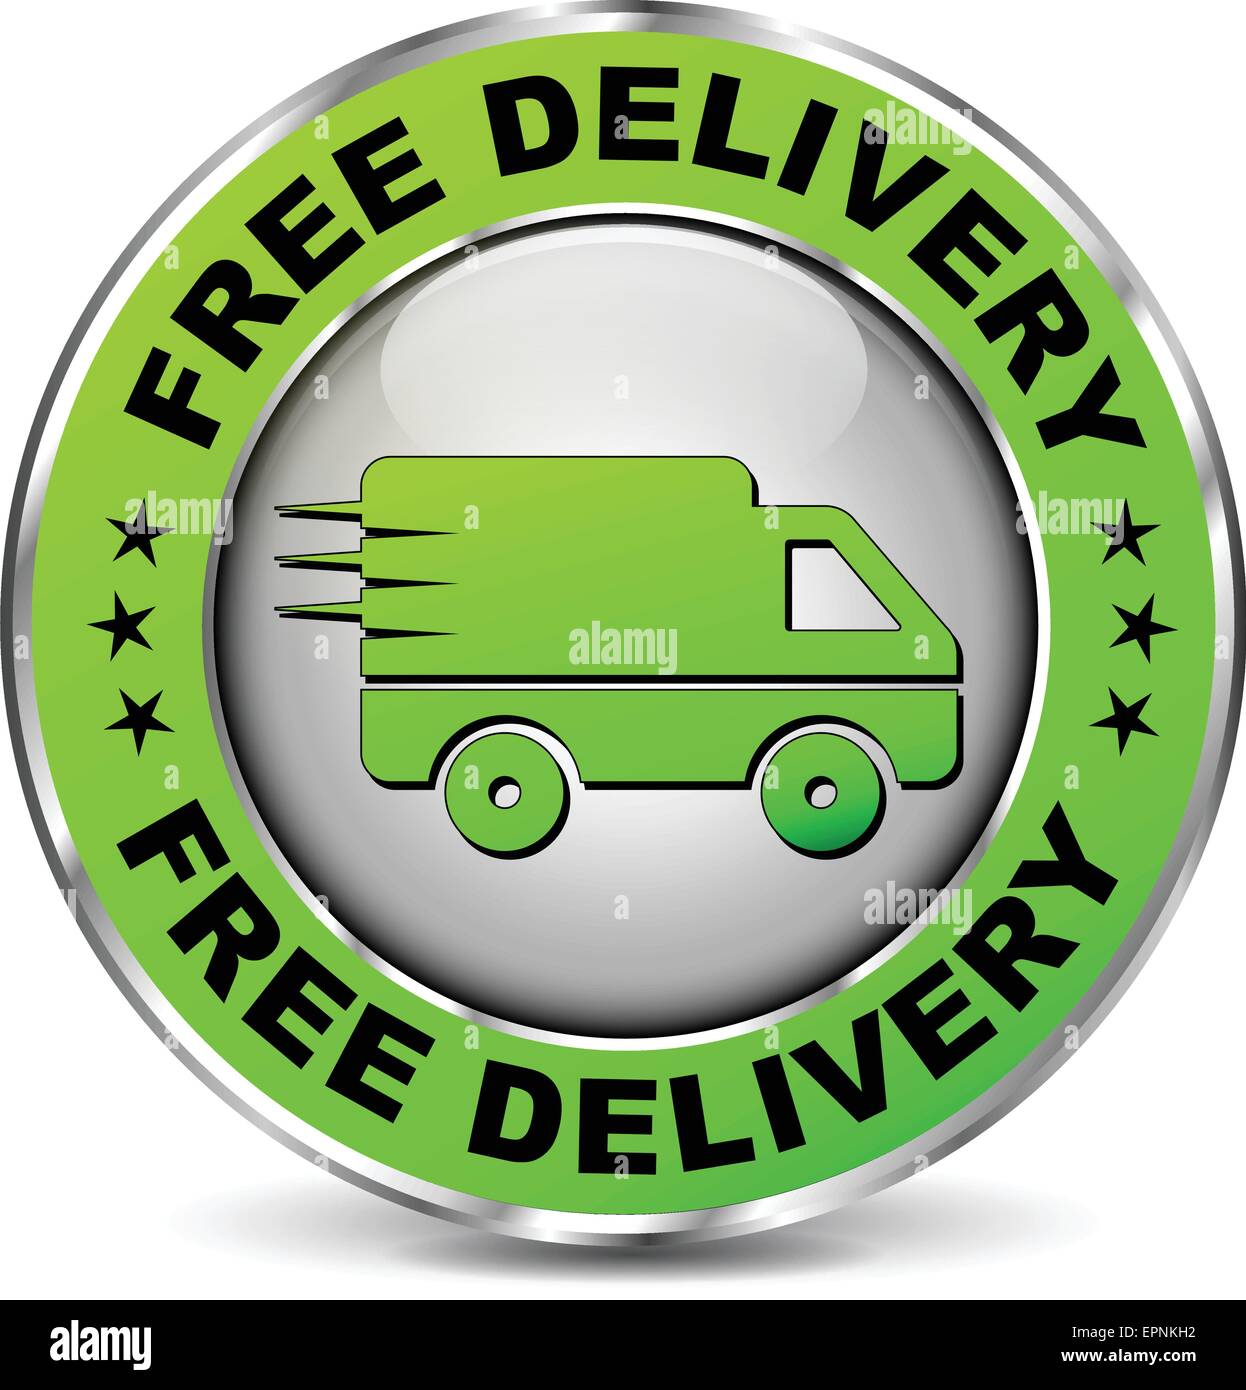 illustration of free delivery green circle icon Stock Vector